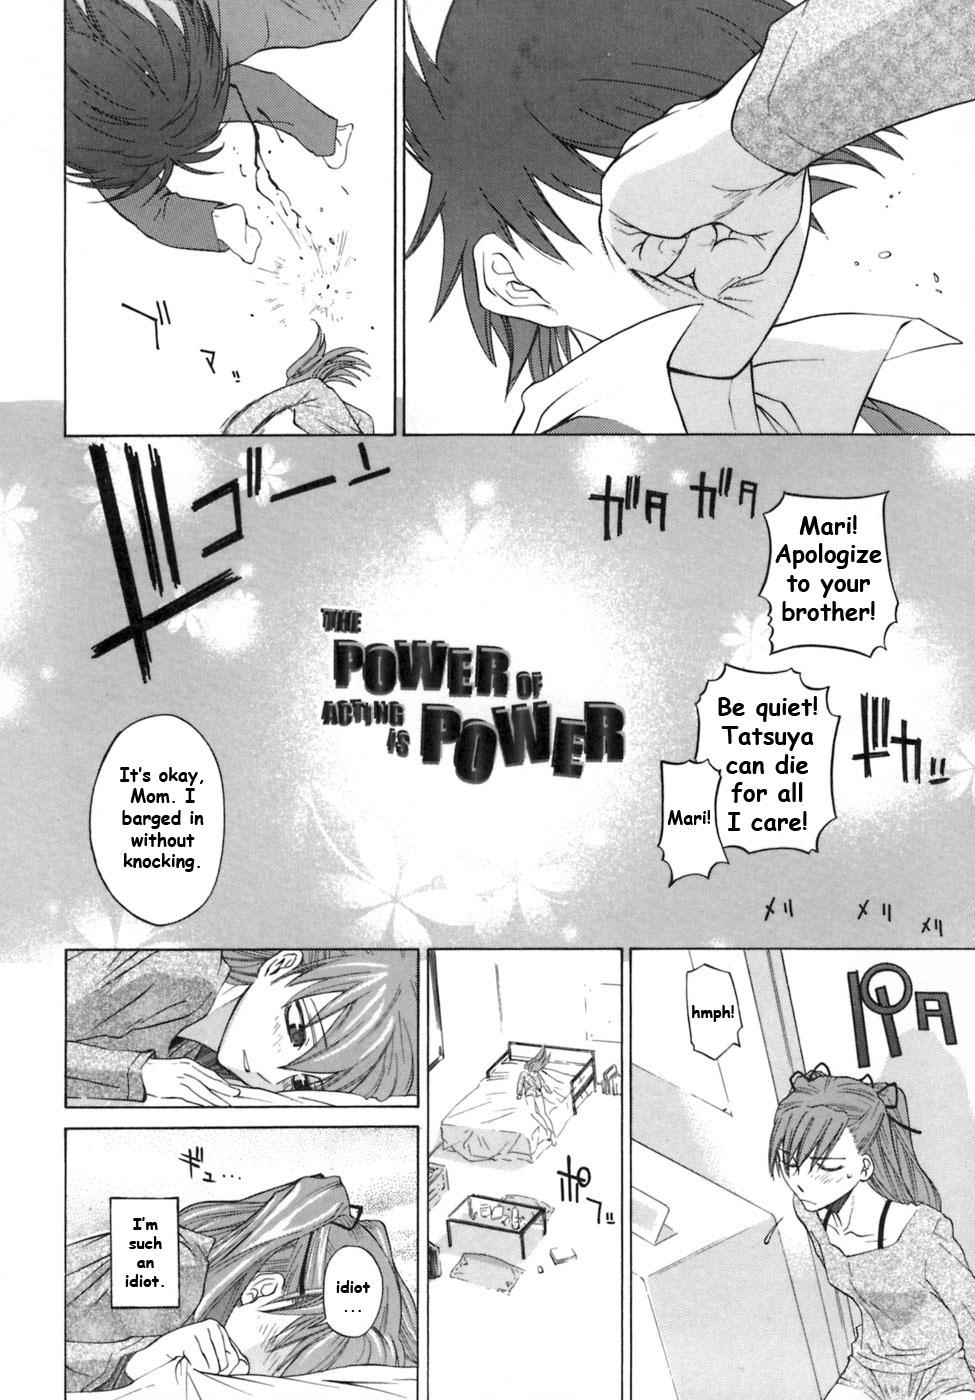 POV The Power of Acting is Power - Ootsuka Kotora Young - Page 6